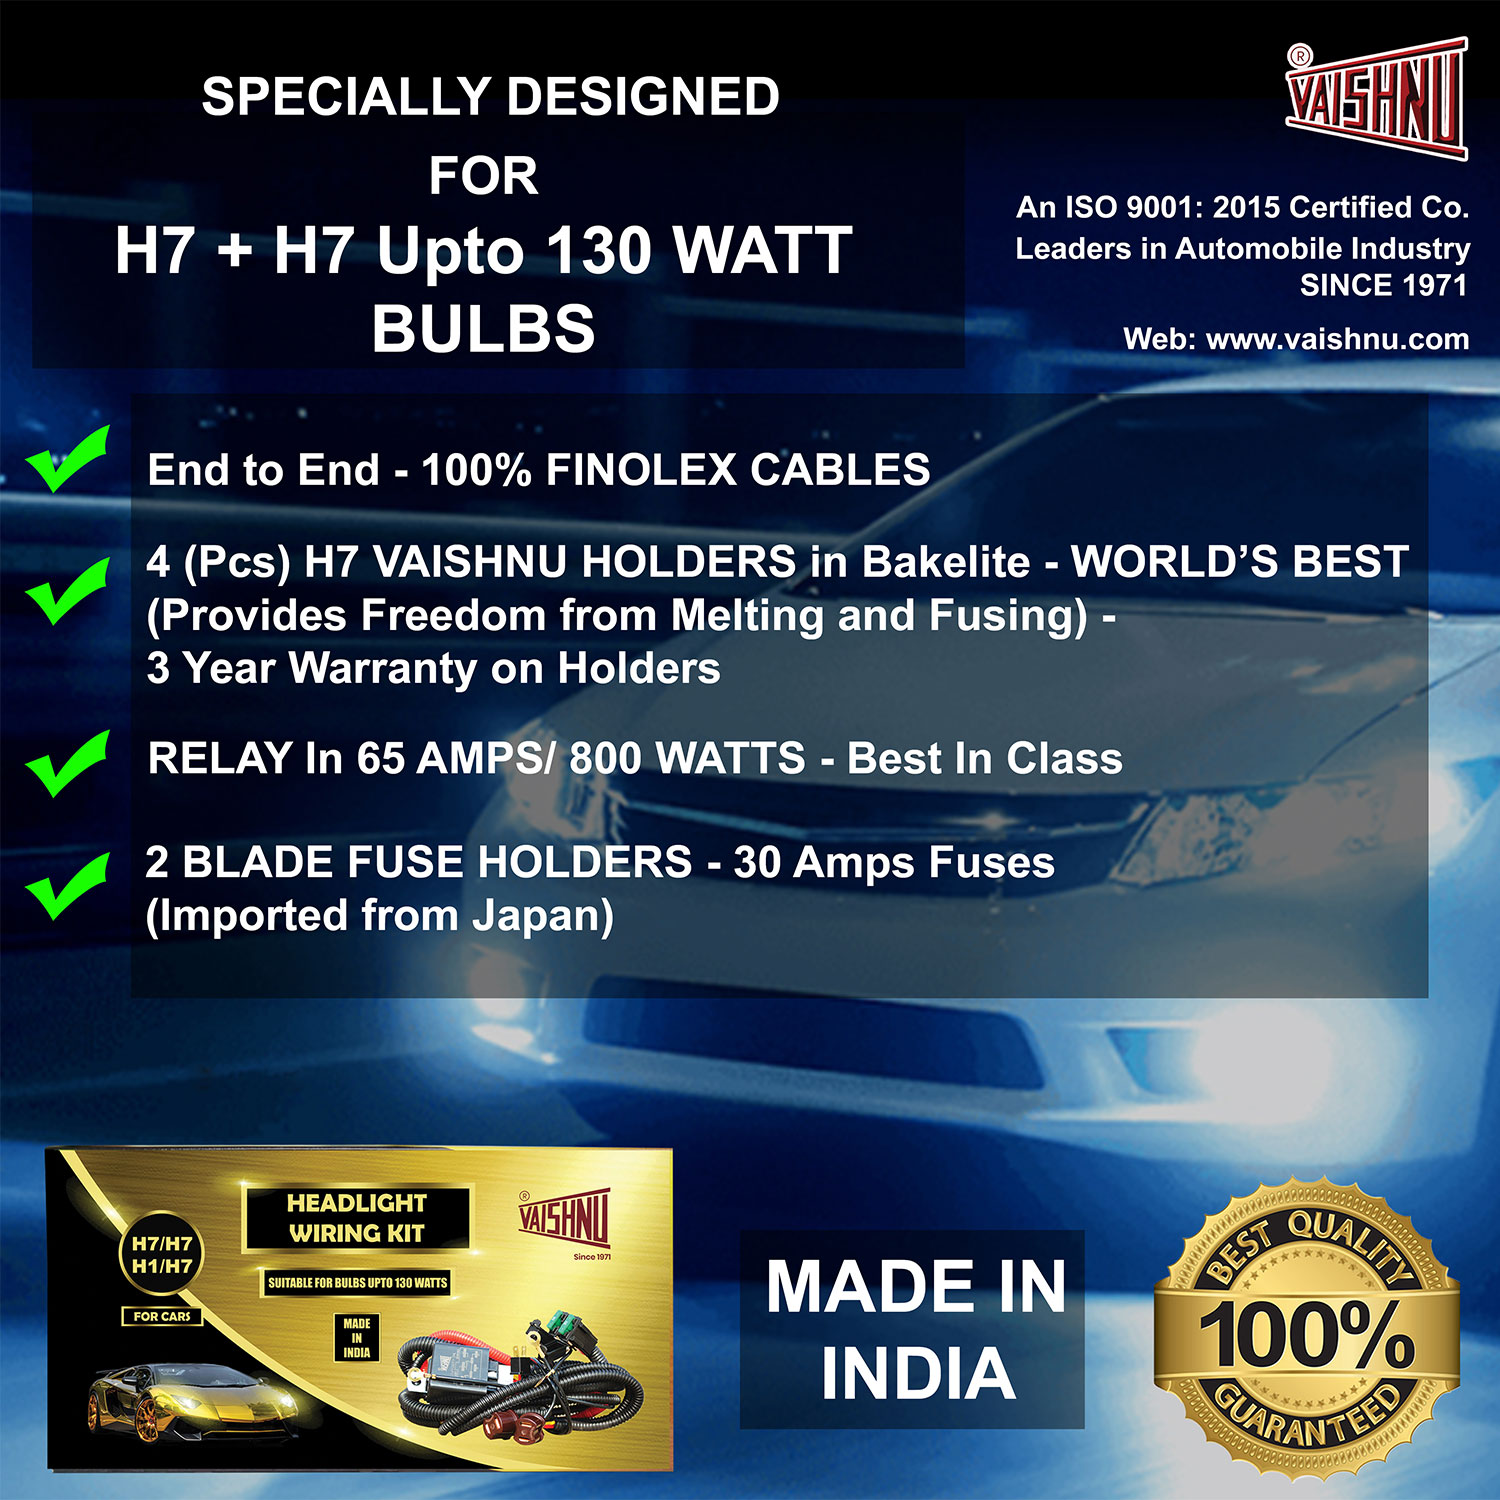 H7 H7 Headlight Wiring Kit for Cars | 1 Year Warranty | 100% Made in India